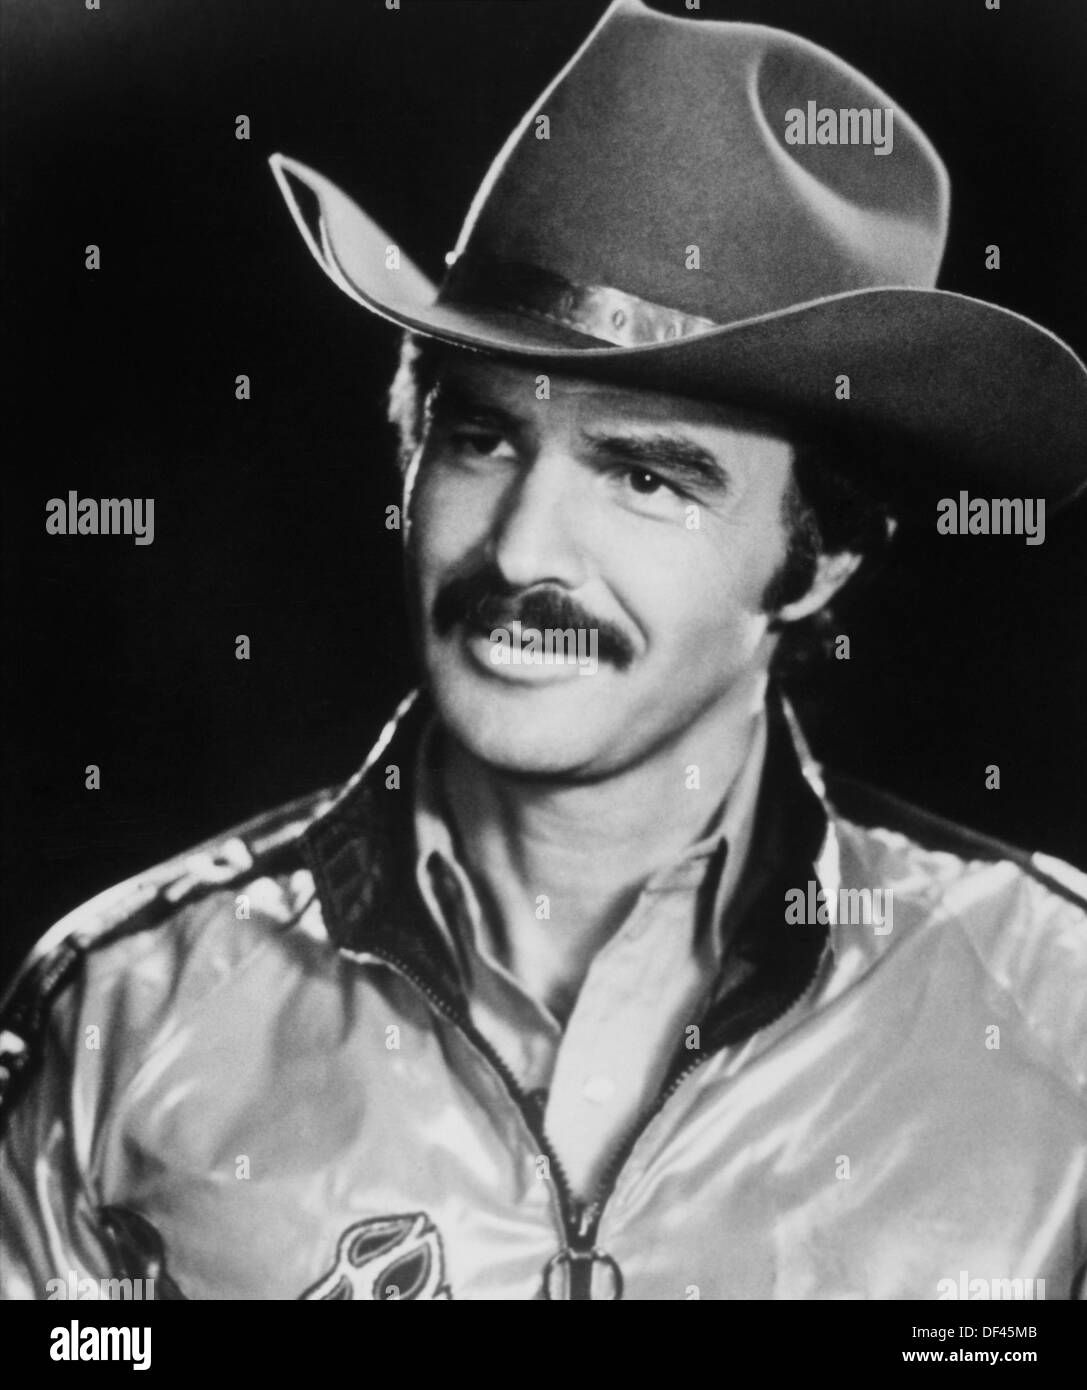 Burt Reynolds, Publicity Portrait for the Film, 'Smokey and the Bandit II', Rastar, Universal Pictures, 1980 Stock Photo